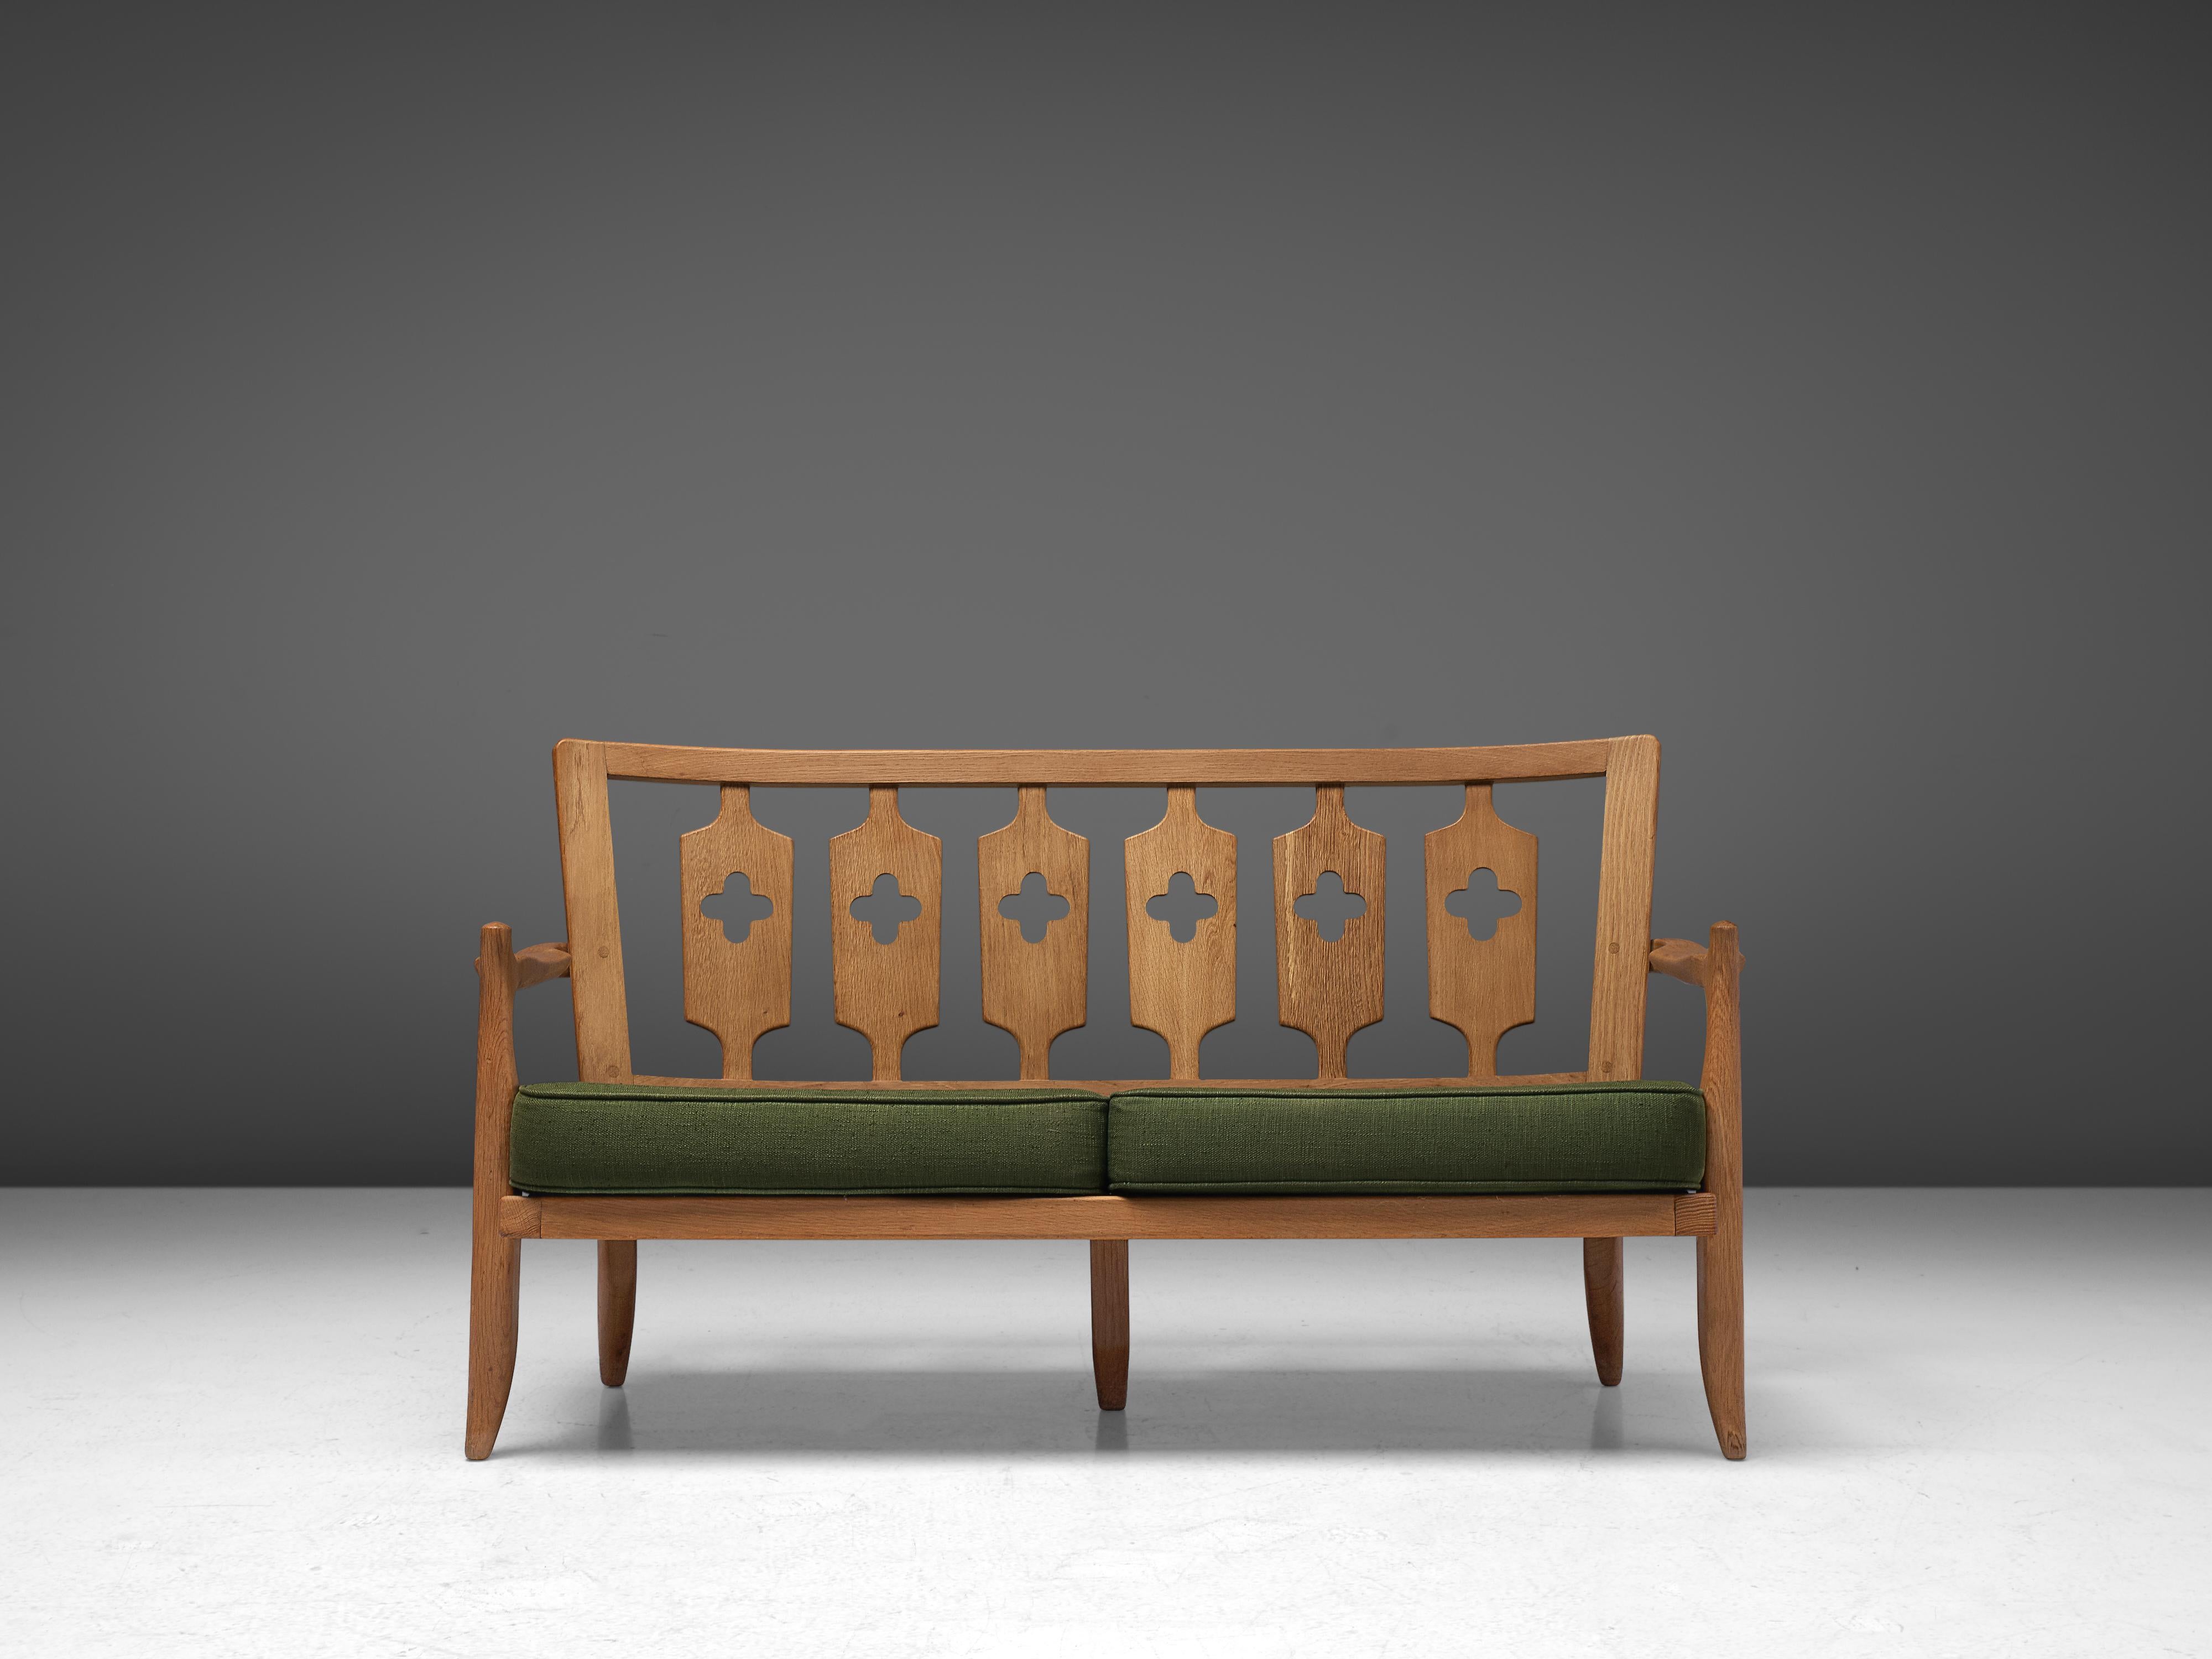 Guillerme et Chambron, sofa, oak, green fabric, France, 1960s

Beautiful two-seat sofa by Guillerme and Chambron, in solid oak with the typical characteristic decorative details at the back and sculpted forms of the legs. The thick, green cushions